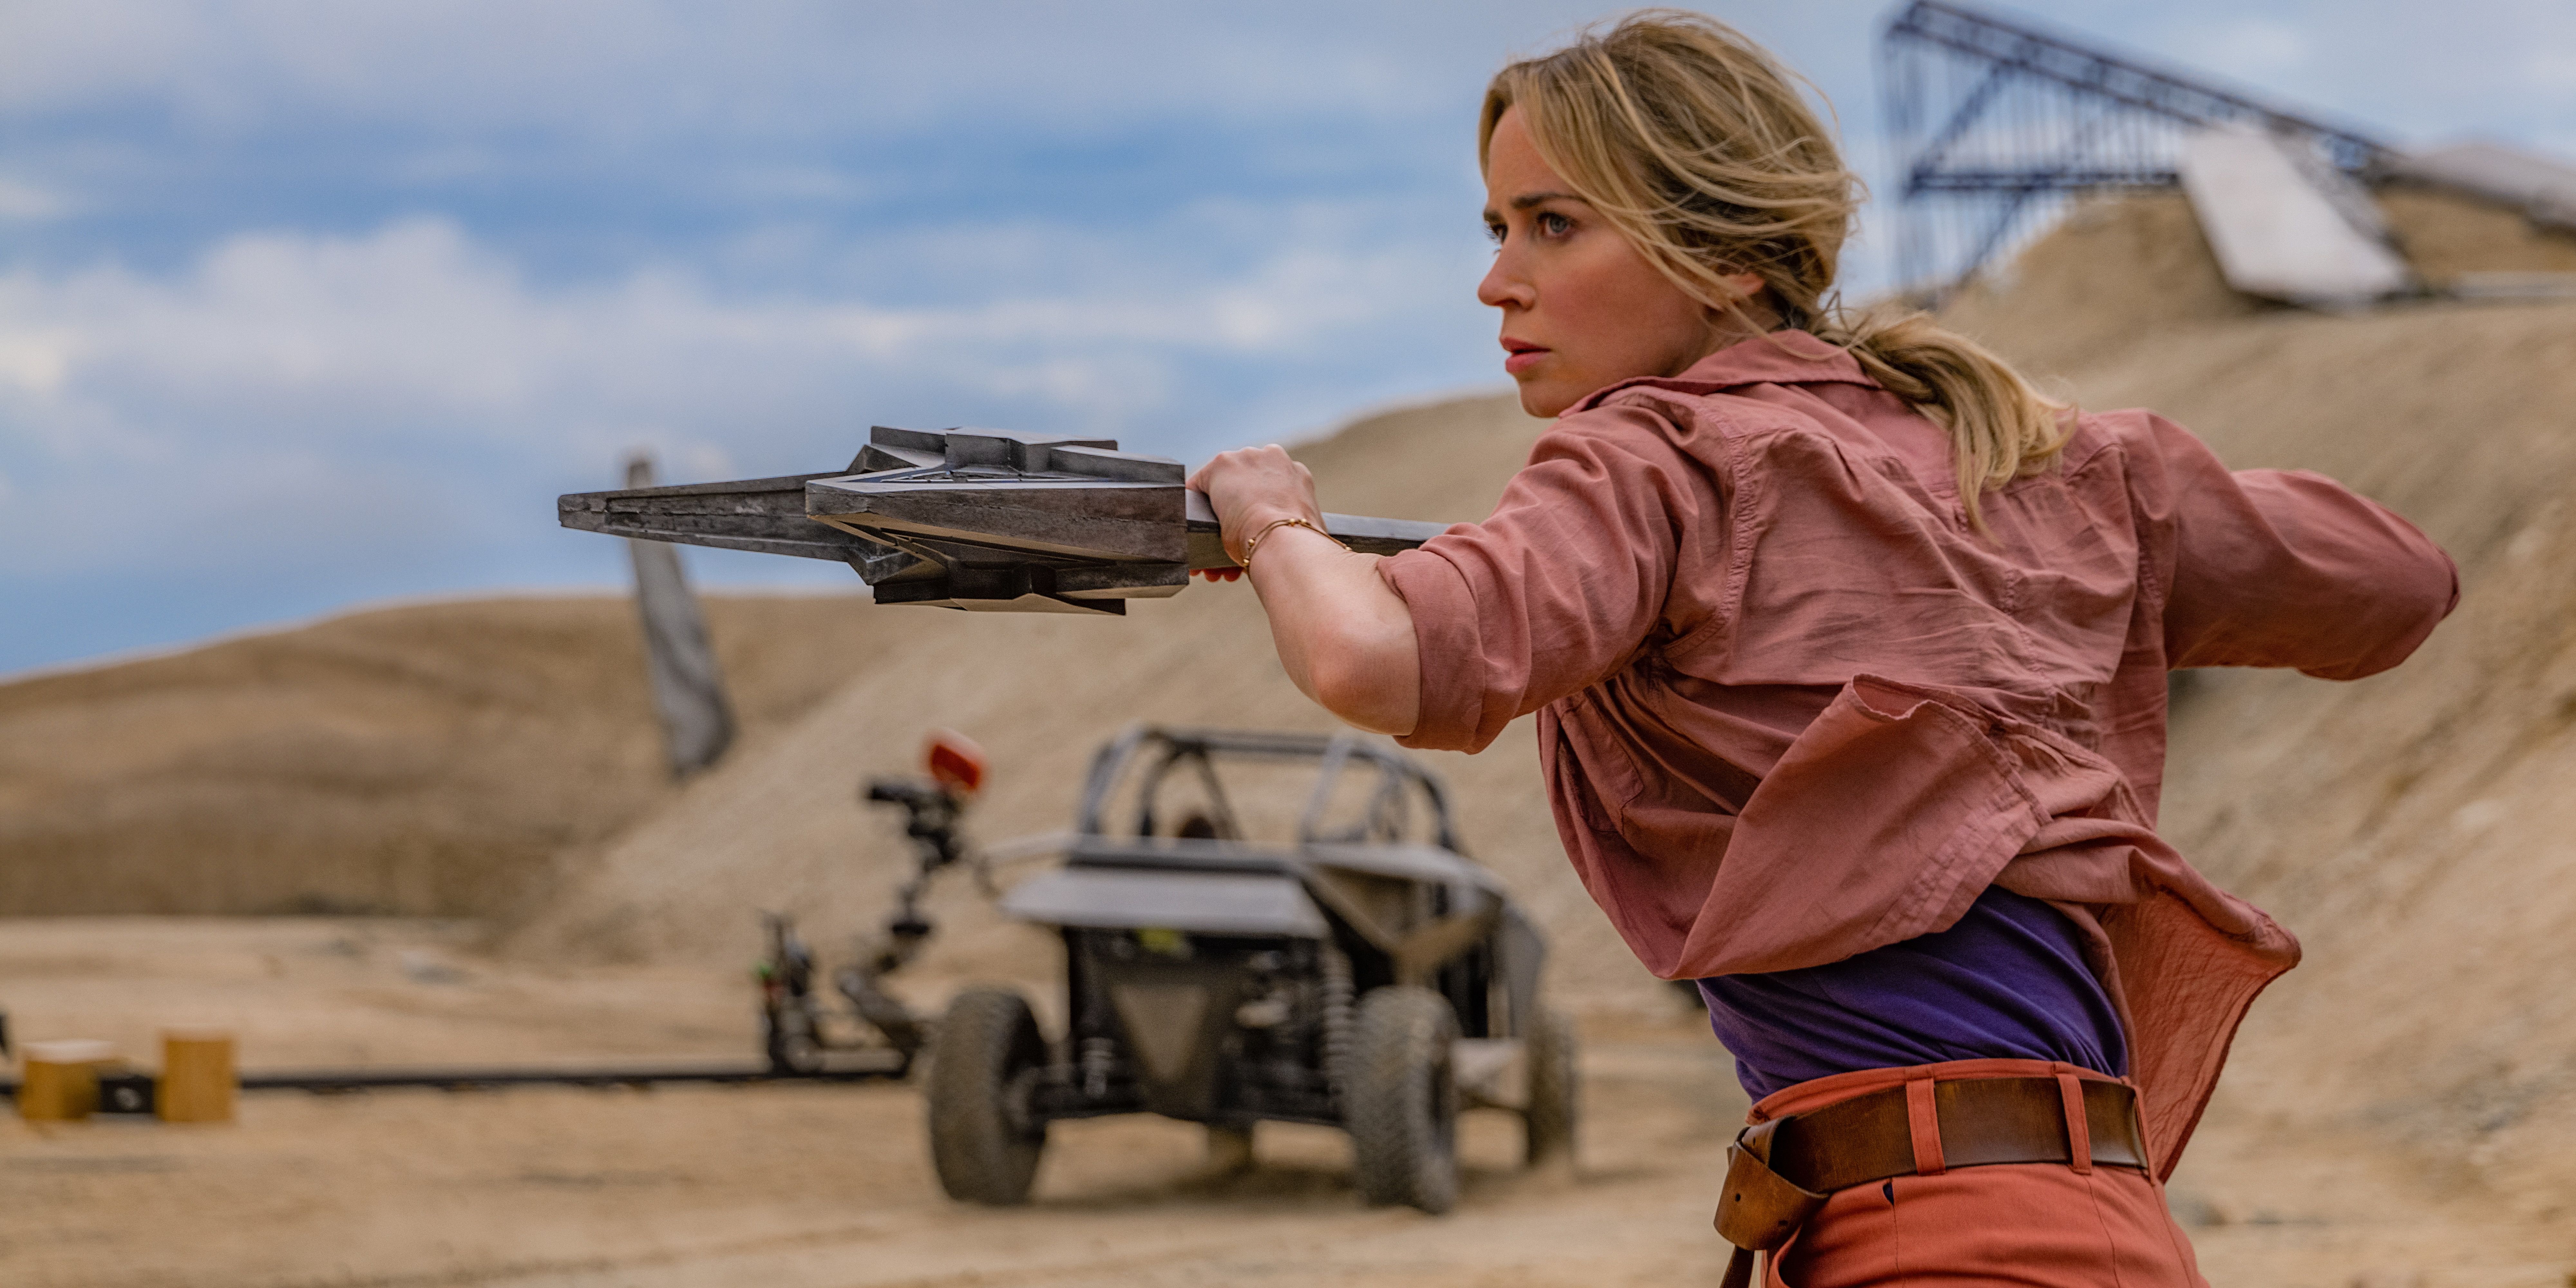 Emily Blunt's 83% Action Movie Return Makes Me Desperate For Upcoming $370 Million Sequel